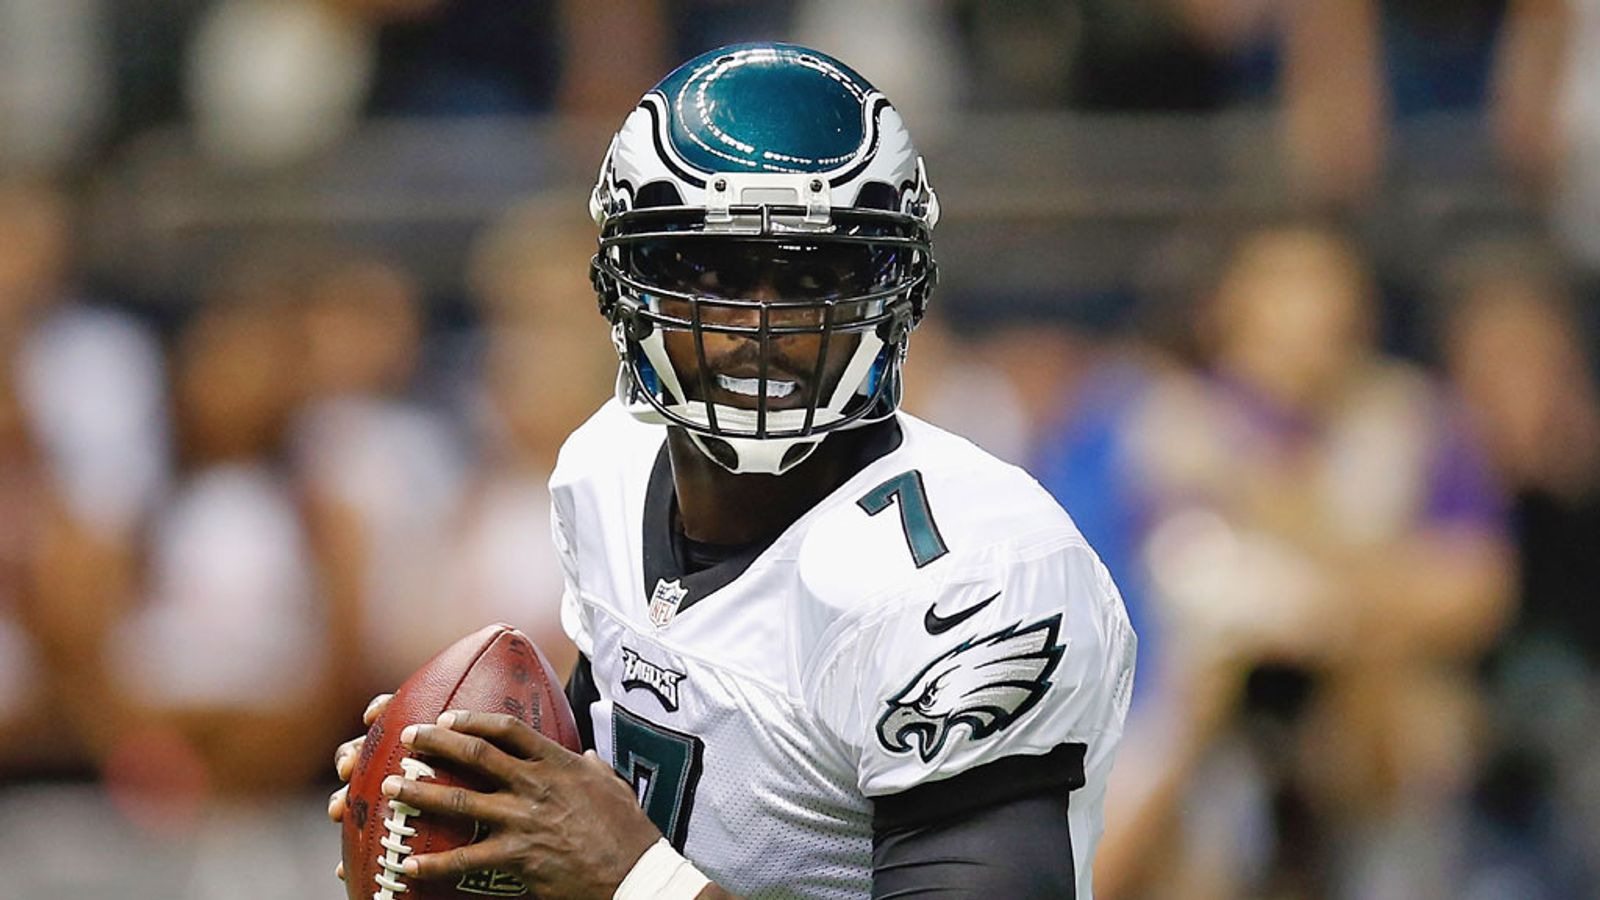 NFL: Quarterback Michael Vick will stay with Philadelphia Eagles in 2013, NFL News